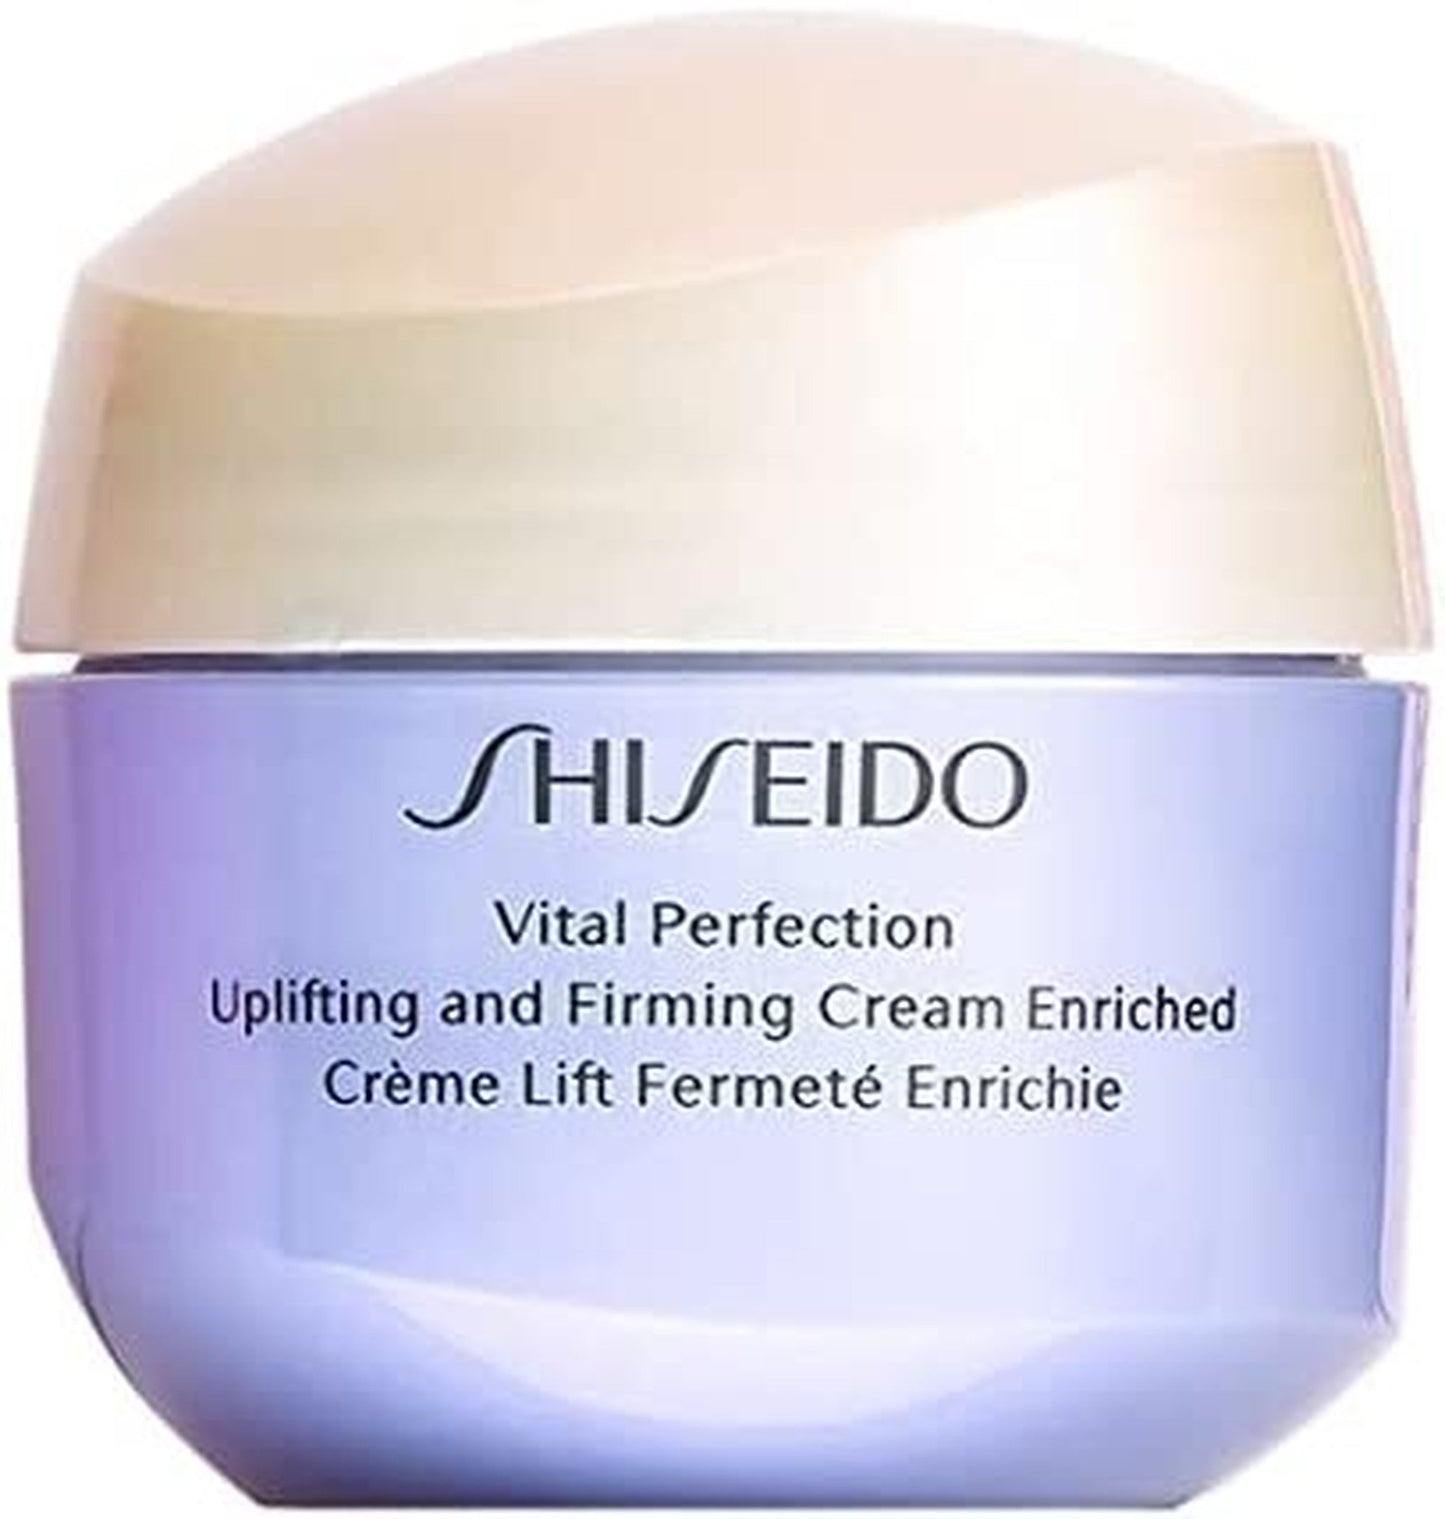 Shiseido SHISEIDO vital perfection UL firming cream enriched special size 15g